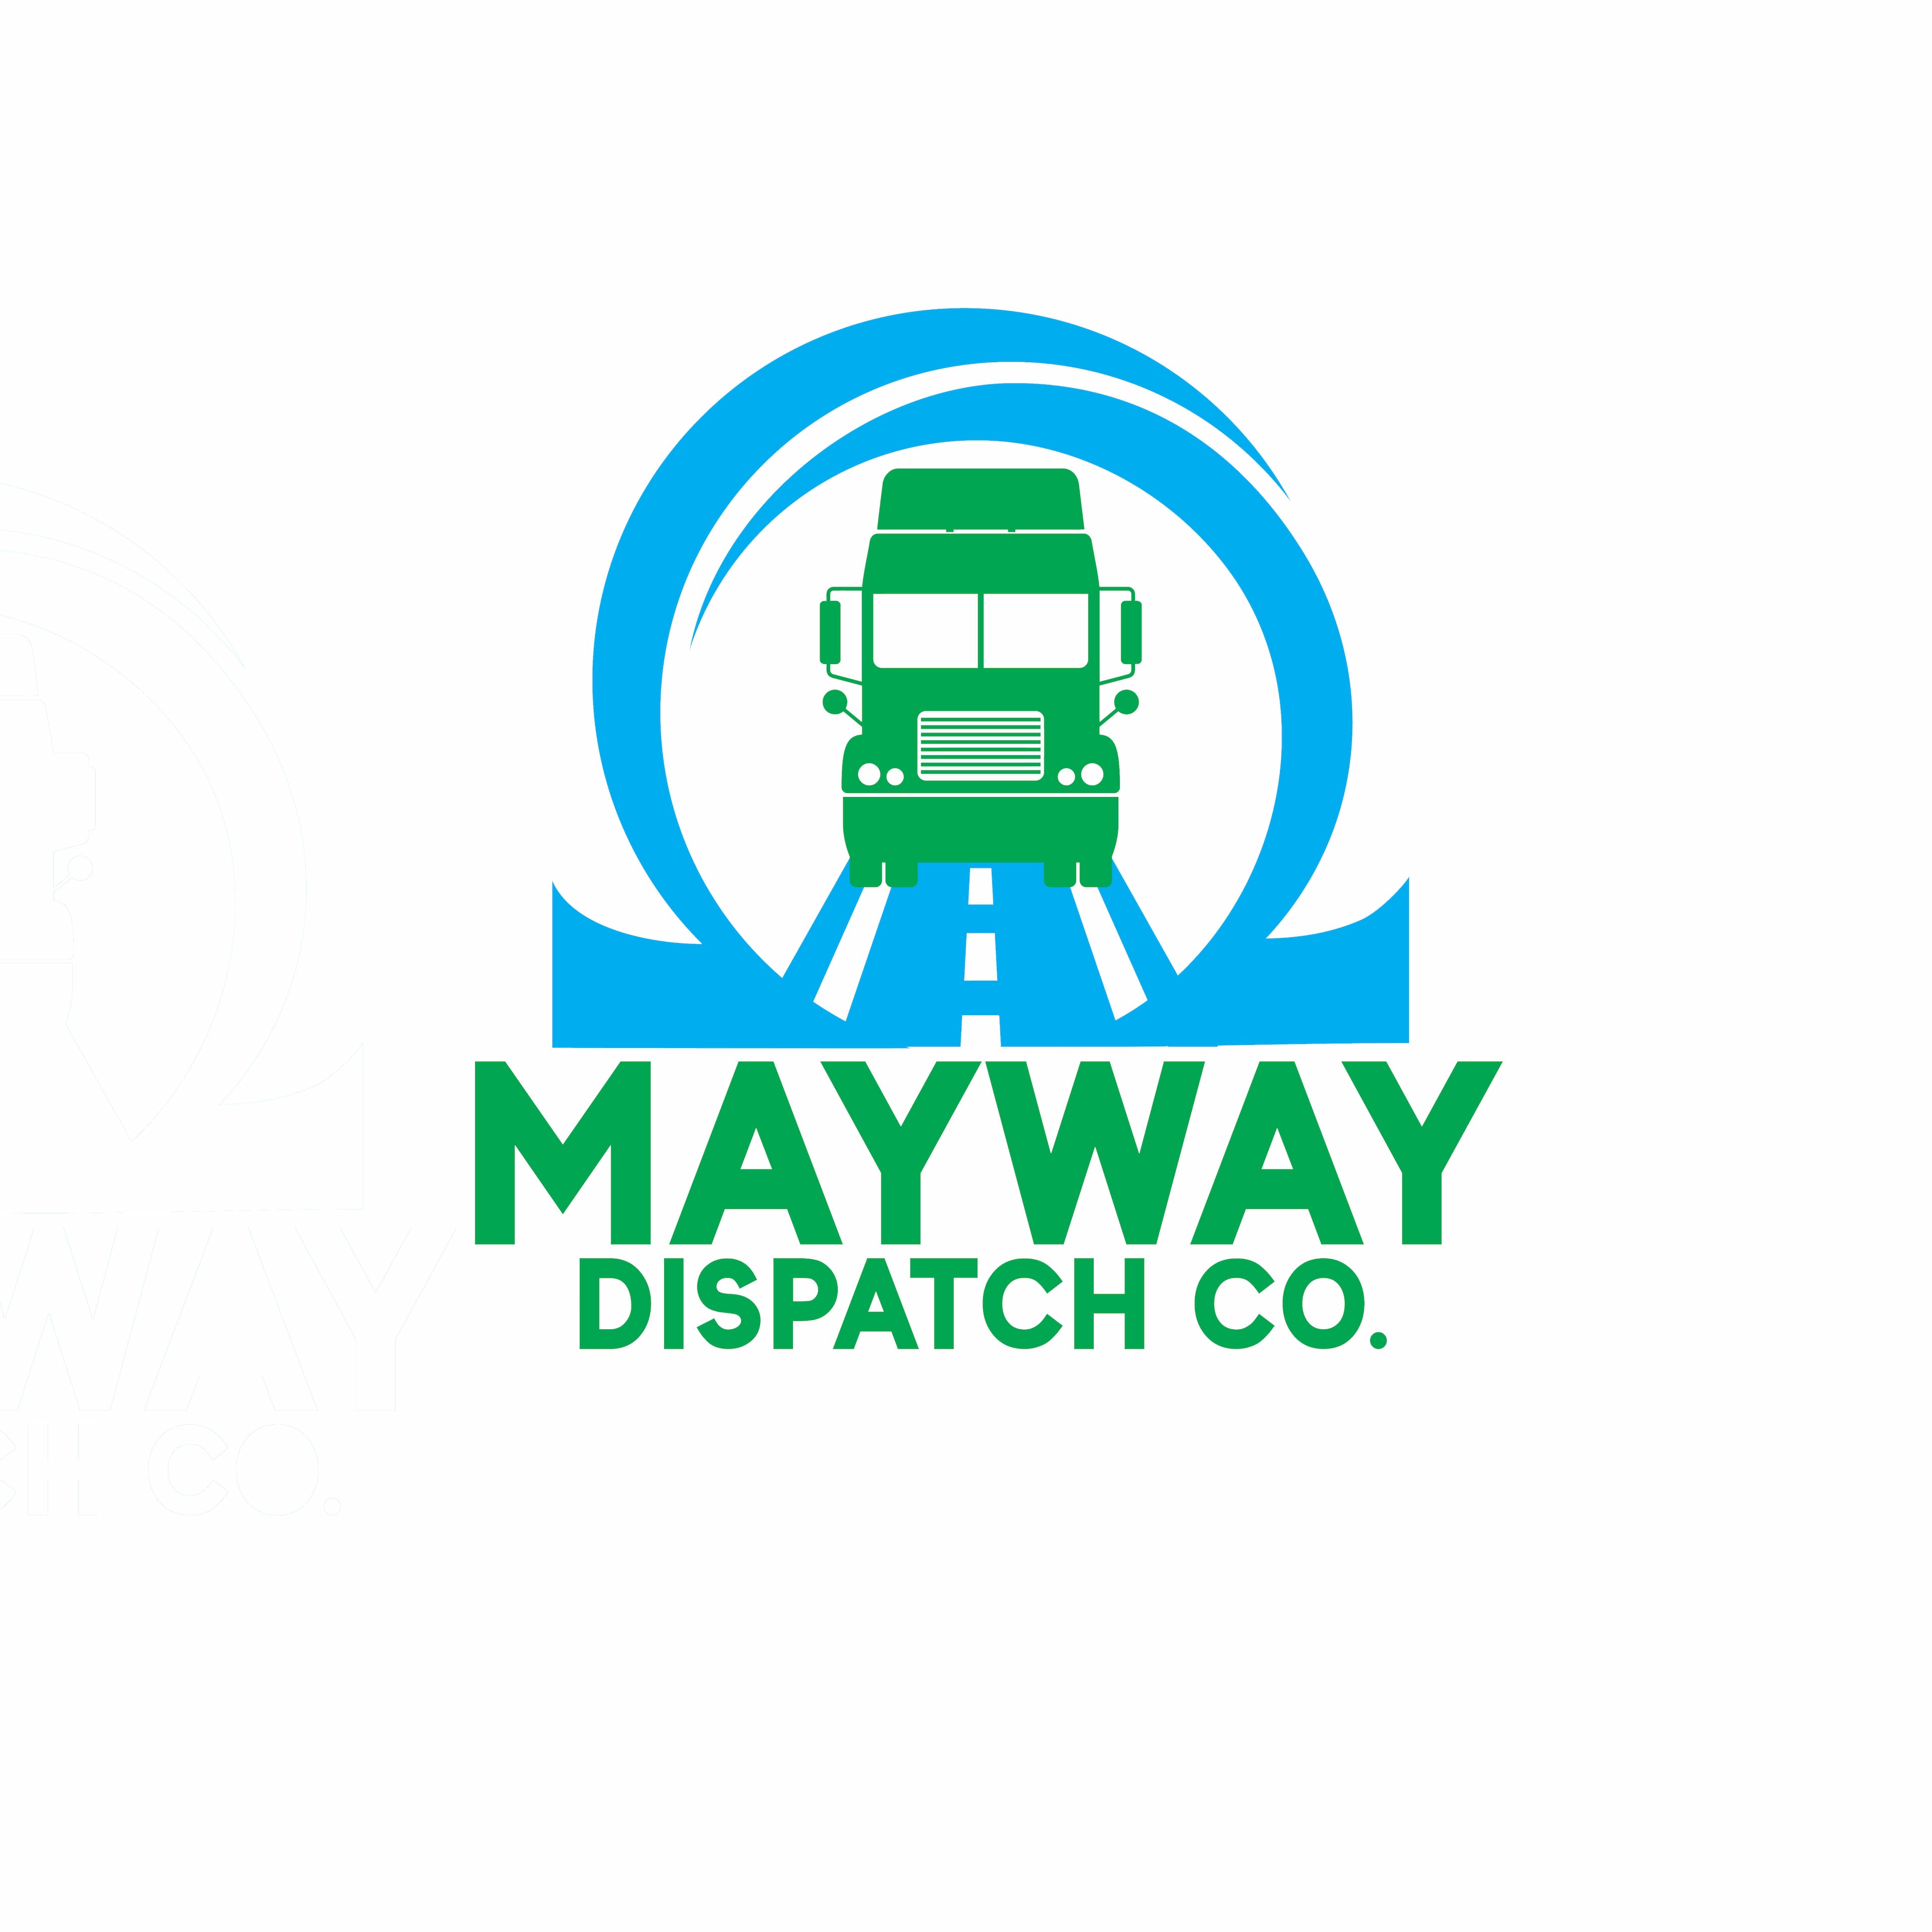 Hey! We here at Mayway Dispatch Co offer dependable dispatch, kind spirited service and profitable opportunities on the road!